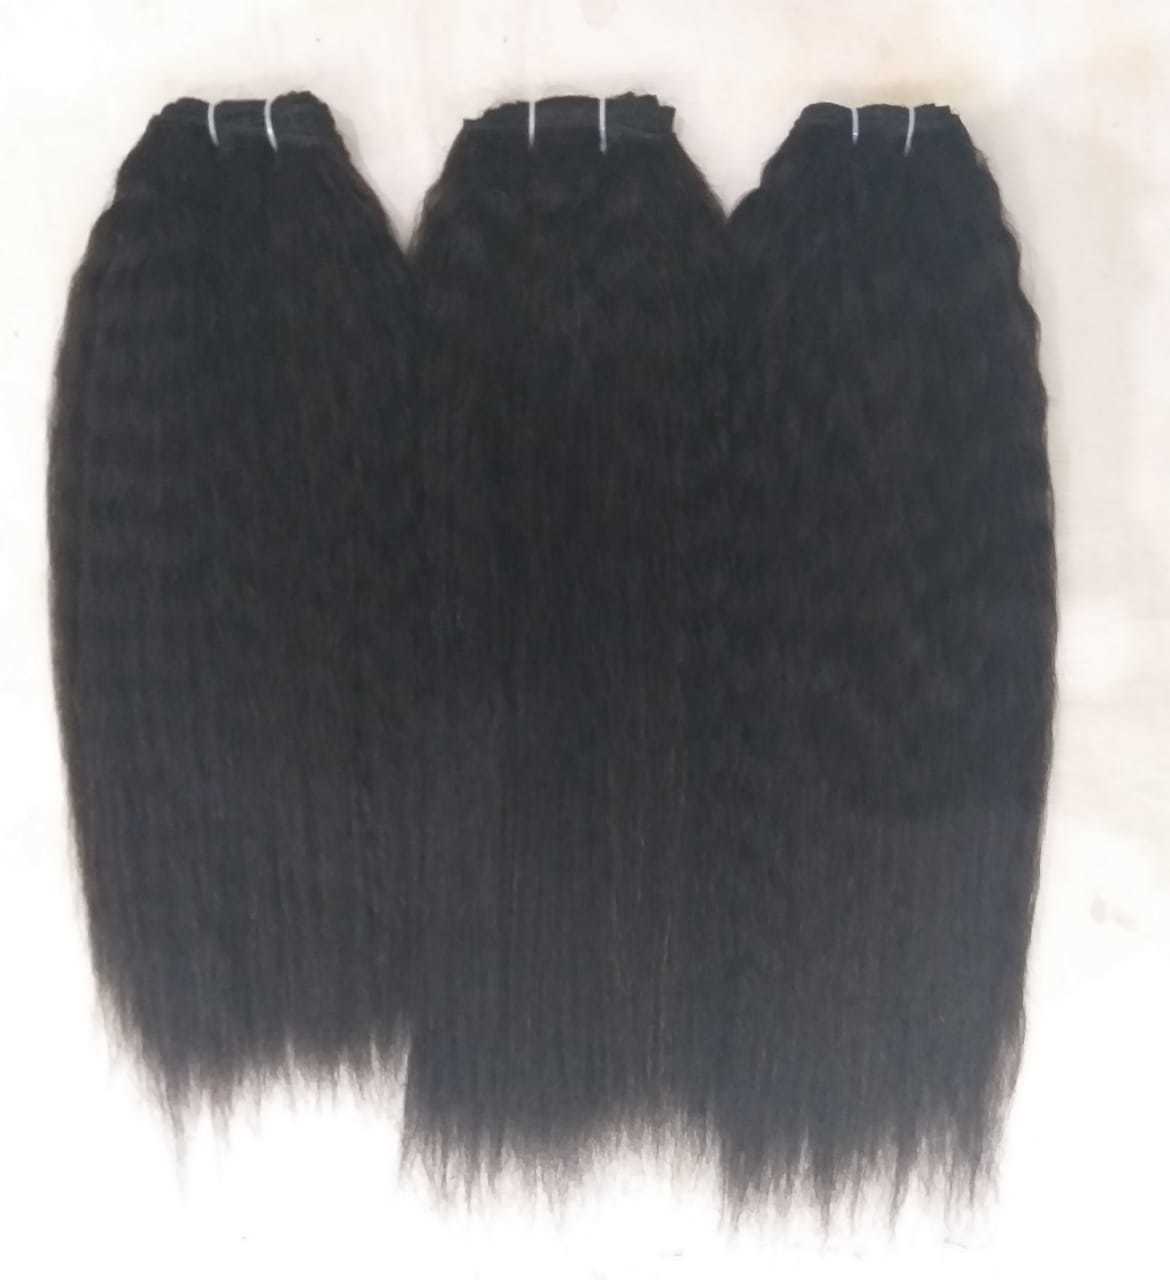 Single Drawn Natural Straight Double Machine Best Hair Extensions